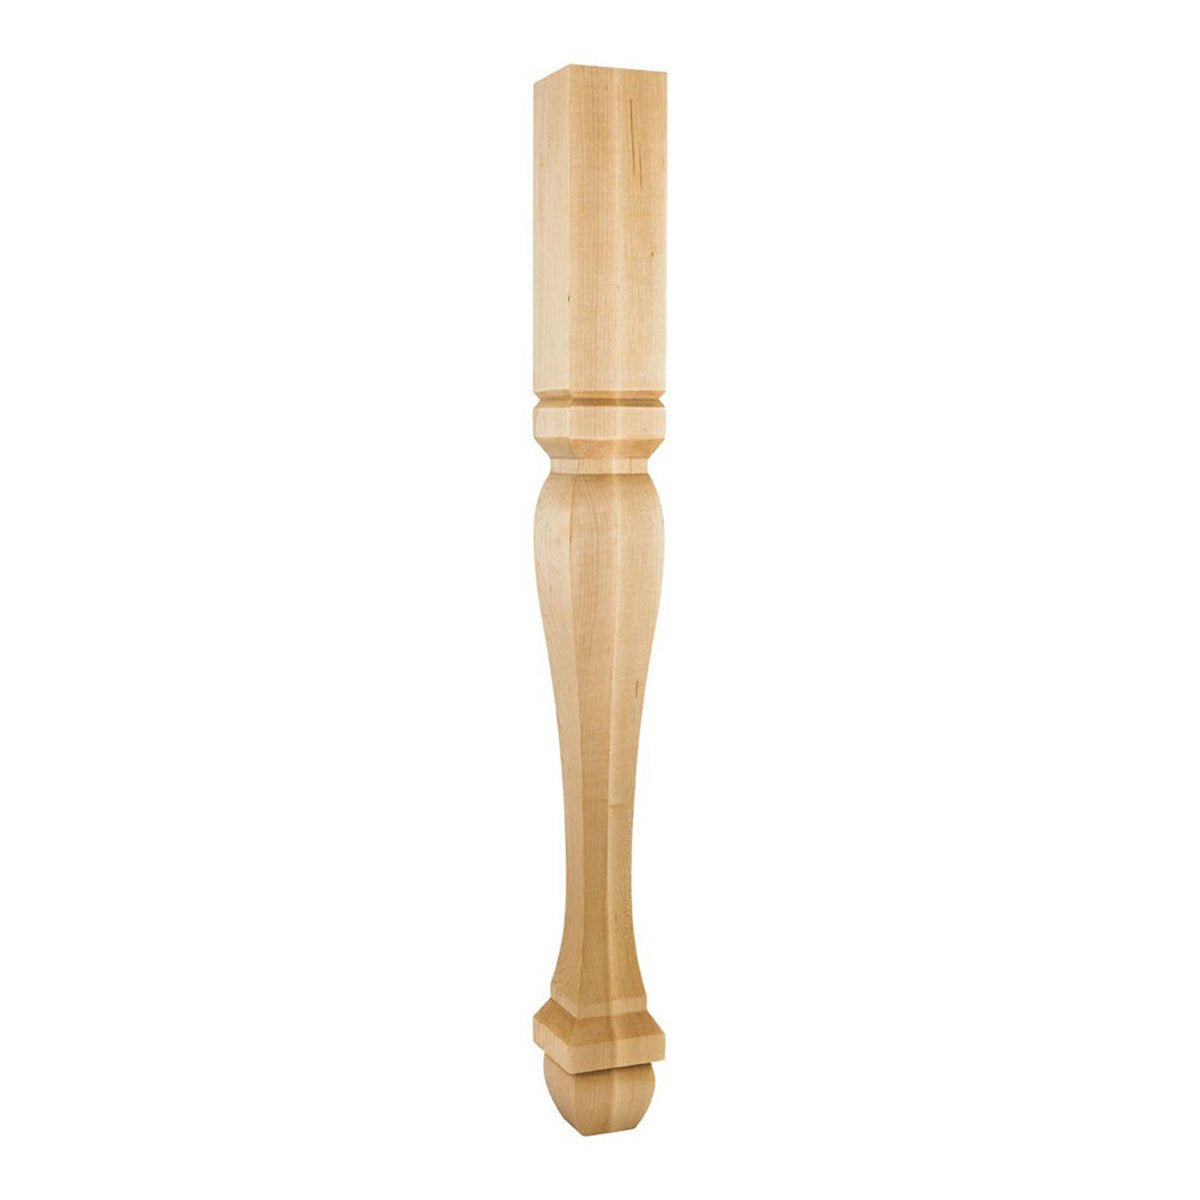 Hardware Resources 3-1/2" x 3-1/2" x 35-1/2" Square Cherry Post / Table Leg with Foot-DirectSinks